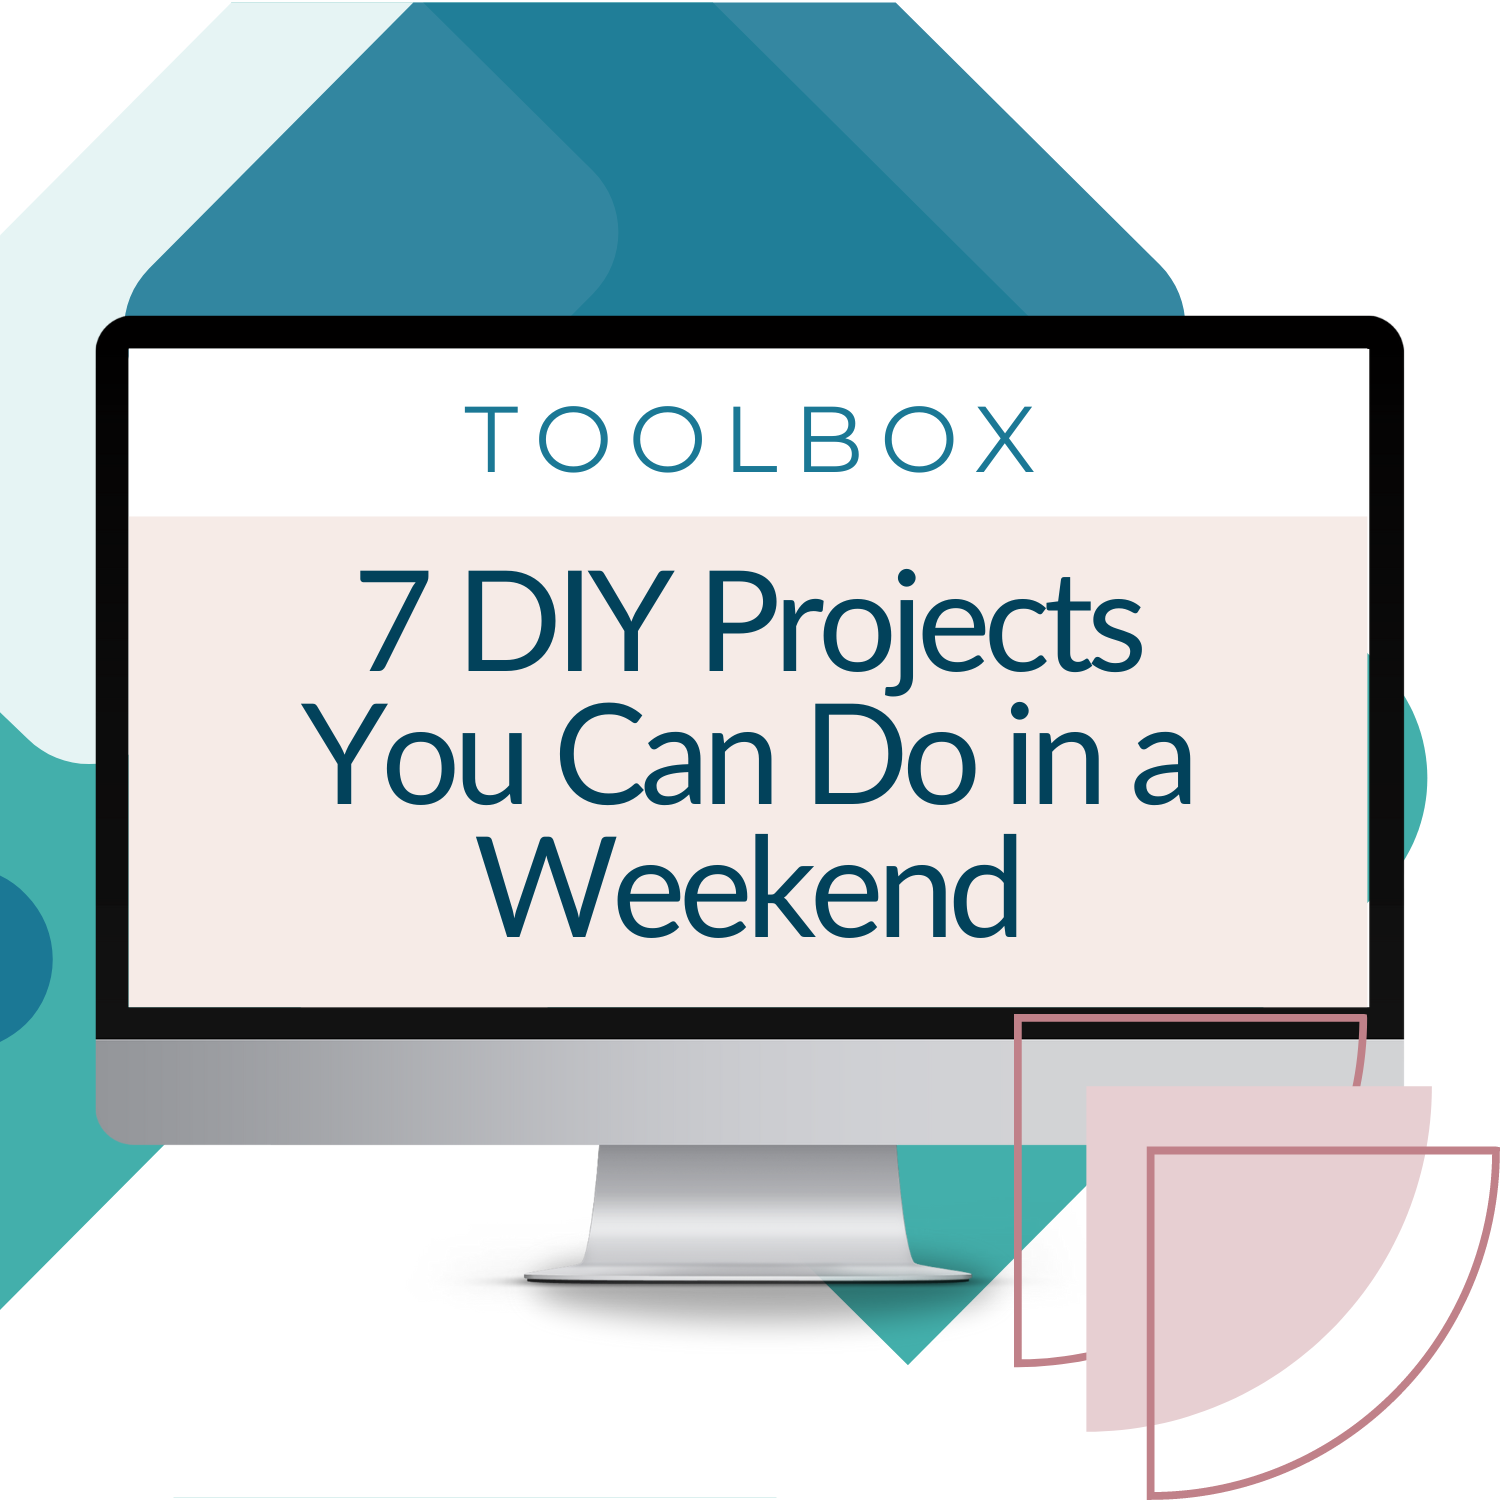 7 DIY Projects You Can Do in a Weekend